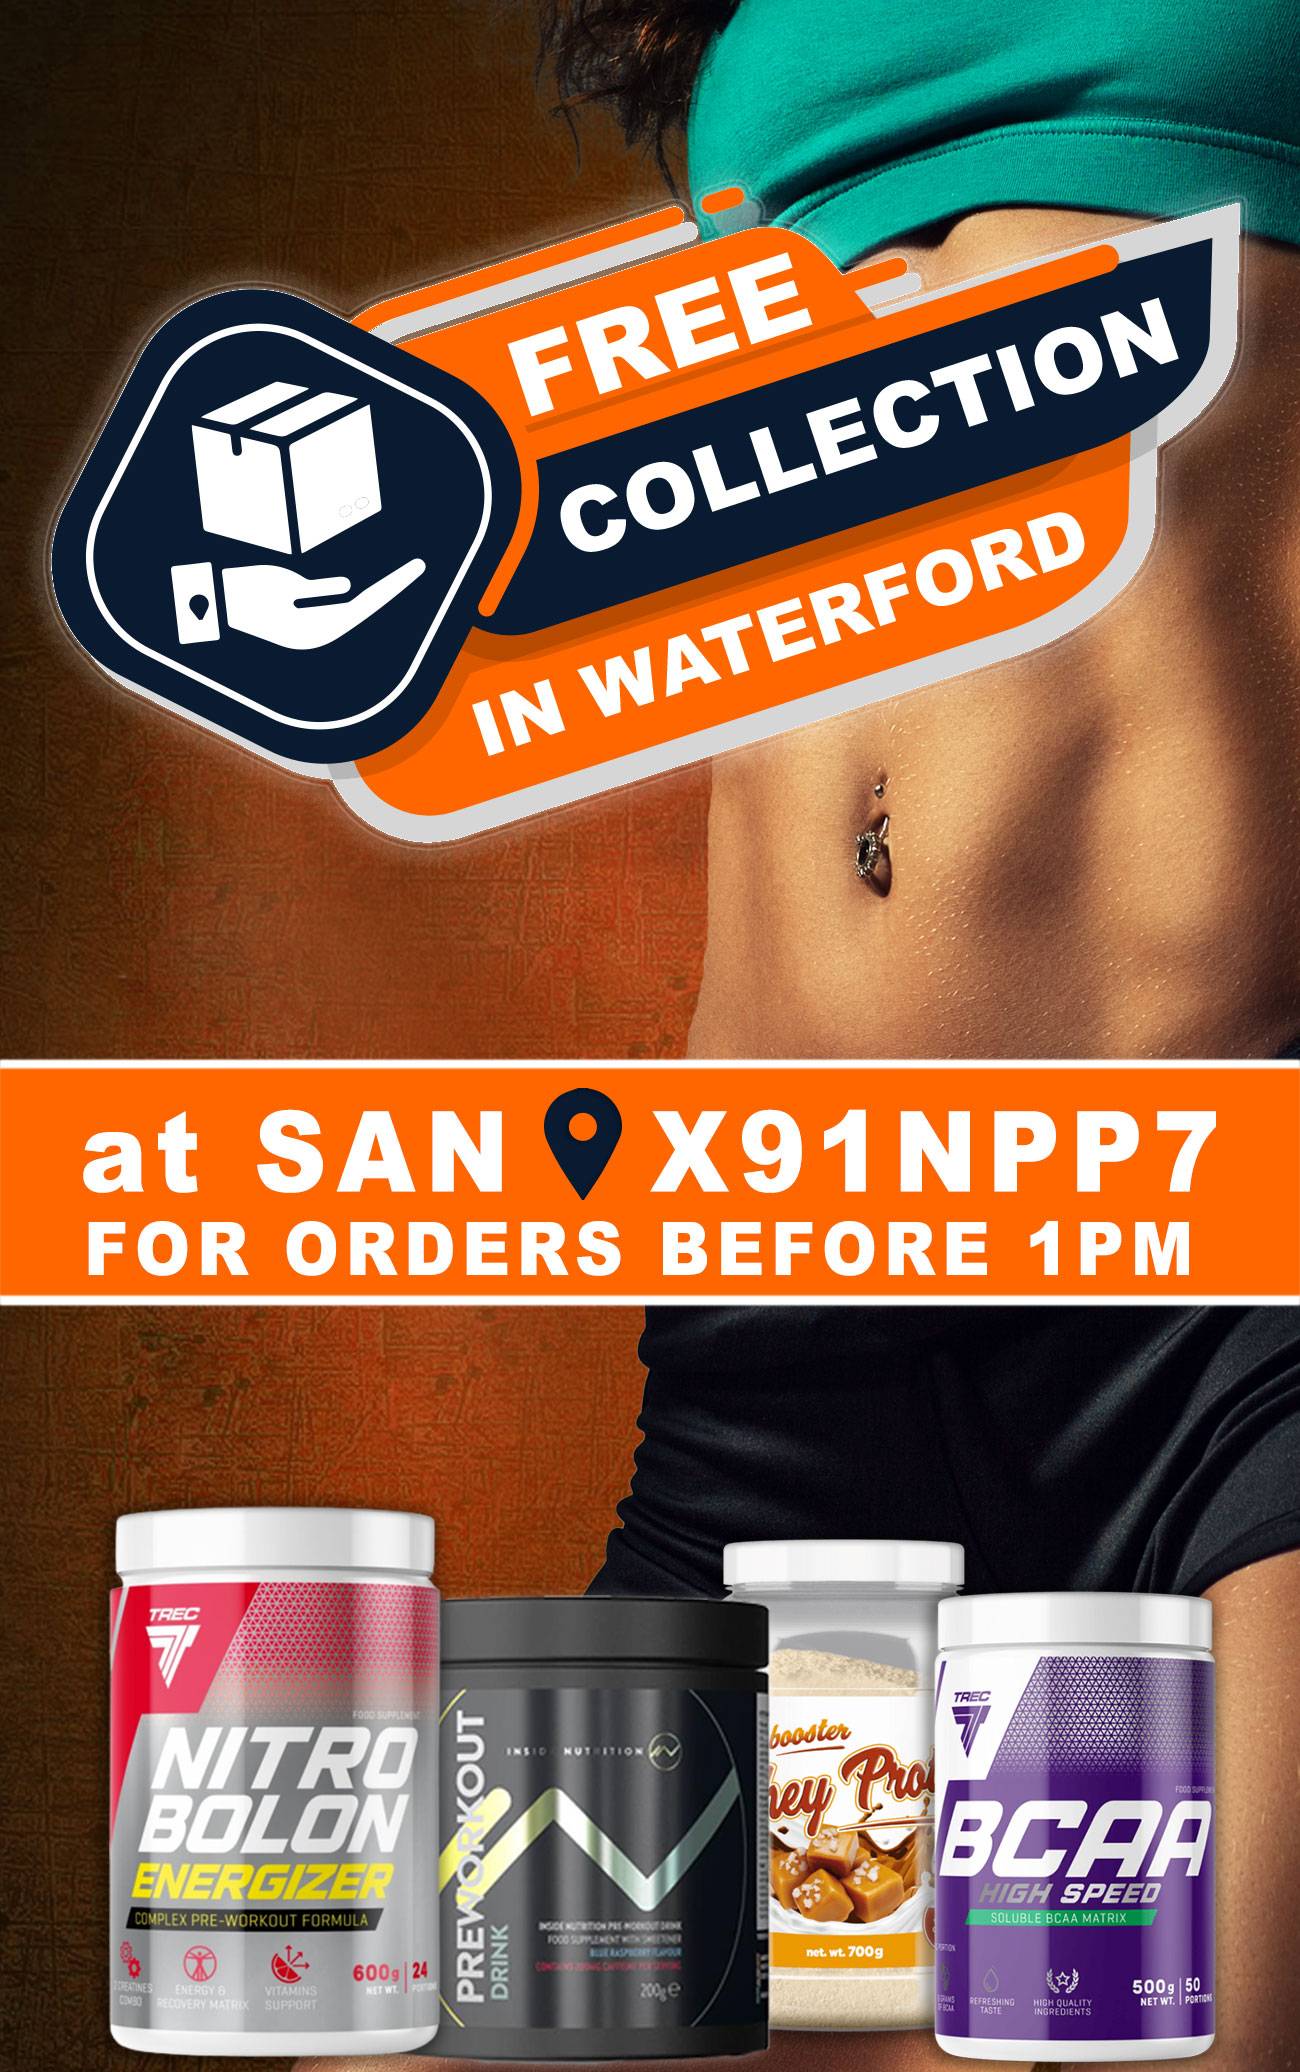 Free collection in waterford